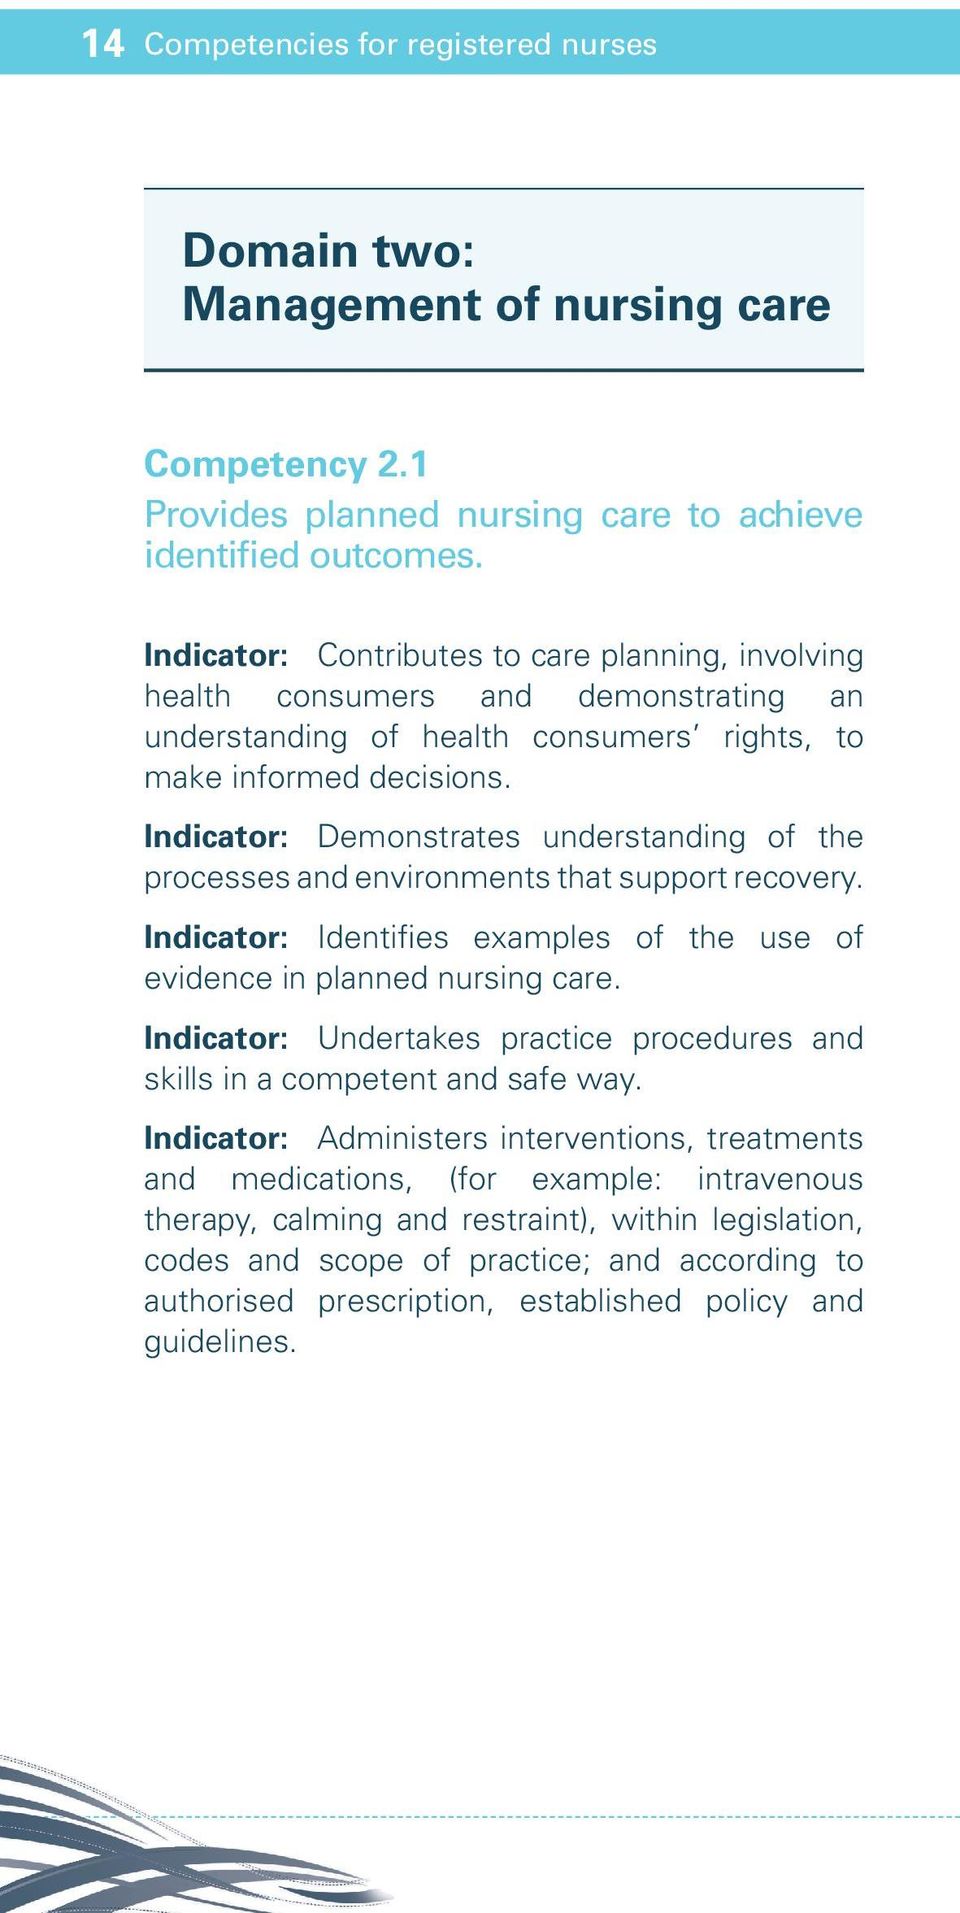 Indicator: Demonstrates understanding of the processes and environments that support recovery. Indicator: Identifies examples of the use of evidence in planned nursing care.